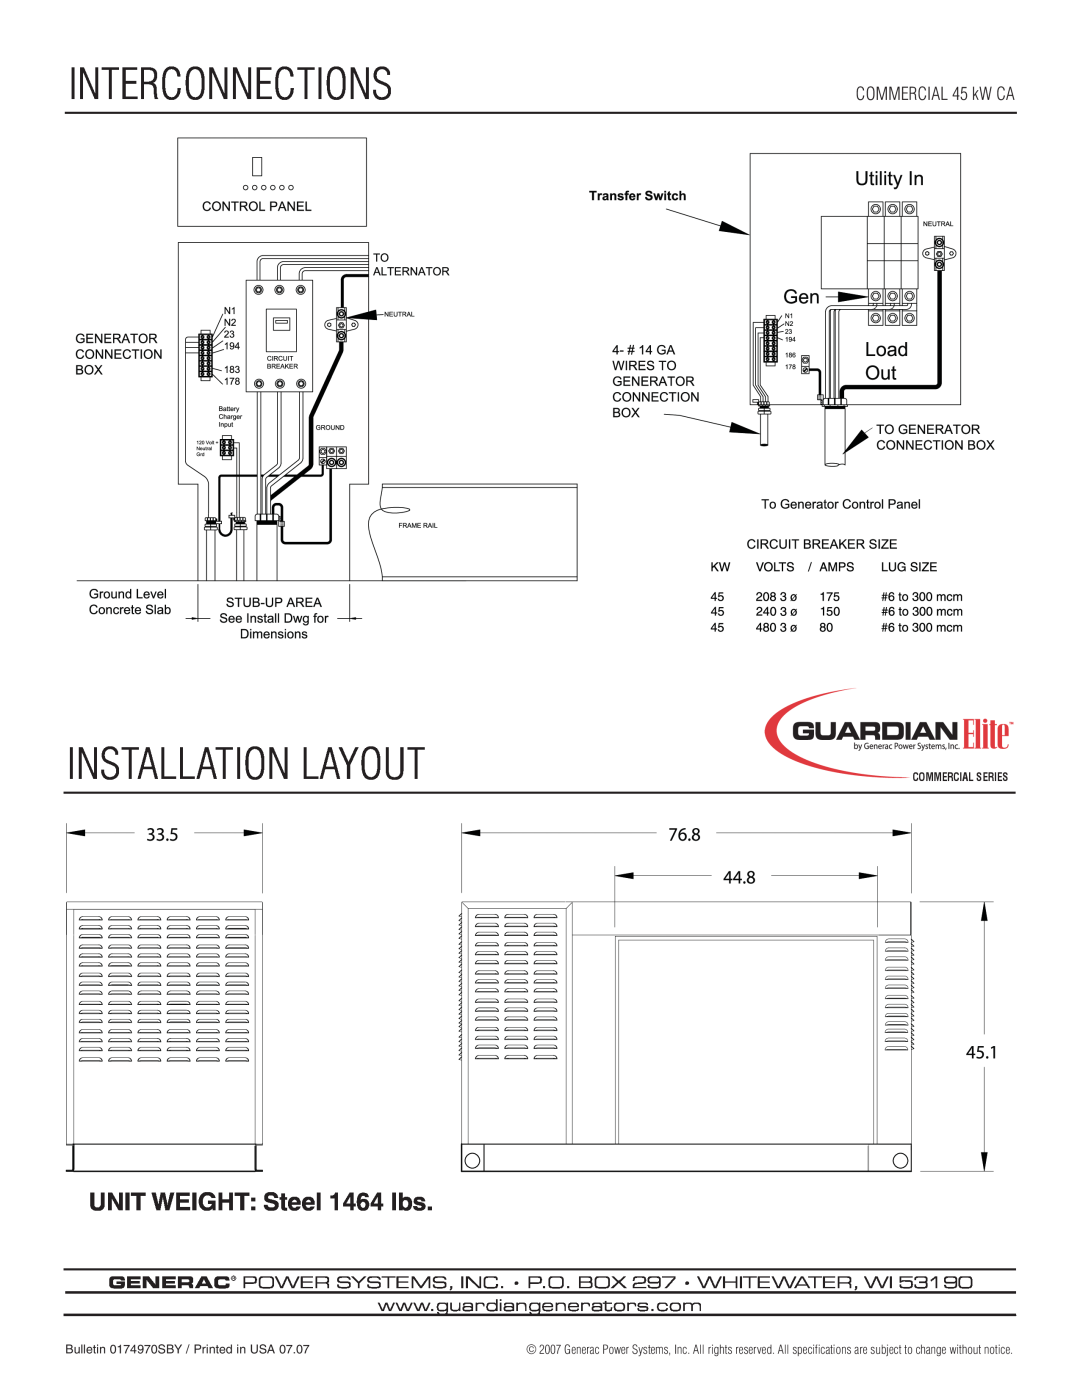 Generac Power Systems QT04524 manual Interconnections, Installation Layout, UNIT WEIGHT Steel 1464 lbs, COMMERCIAL 45 kW CA 